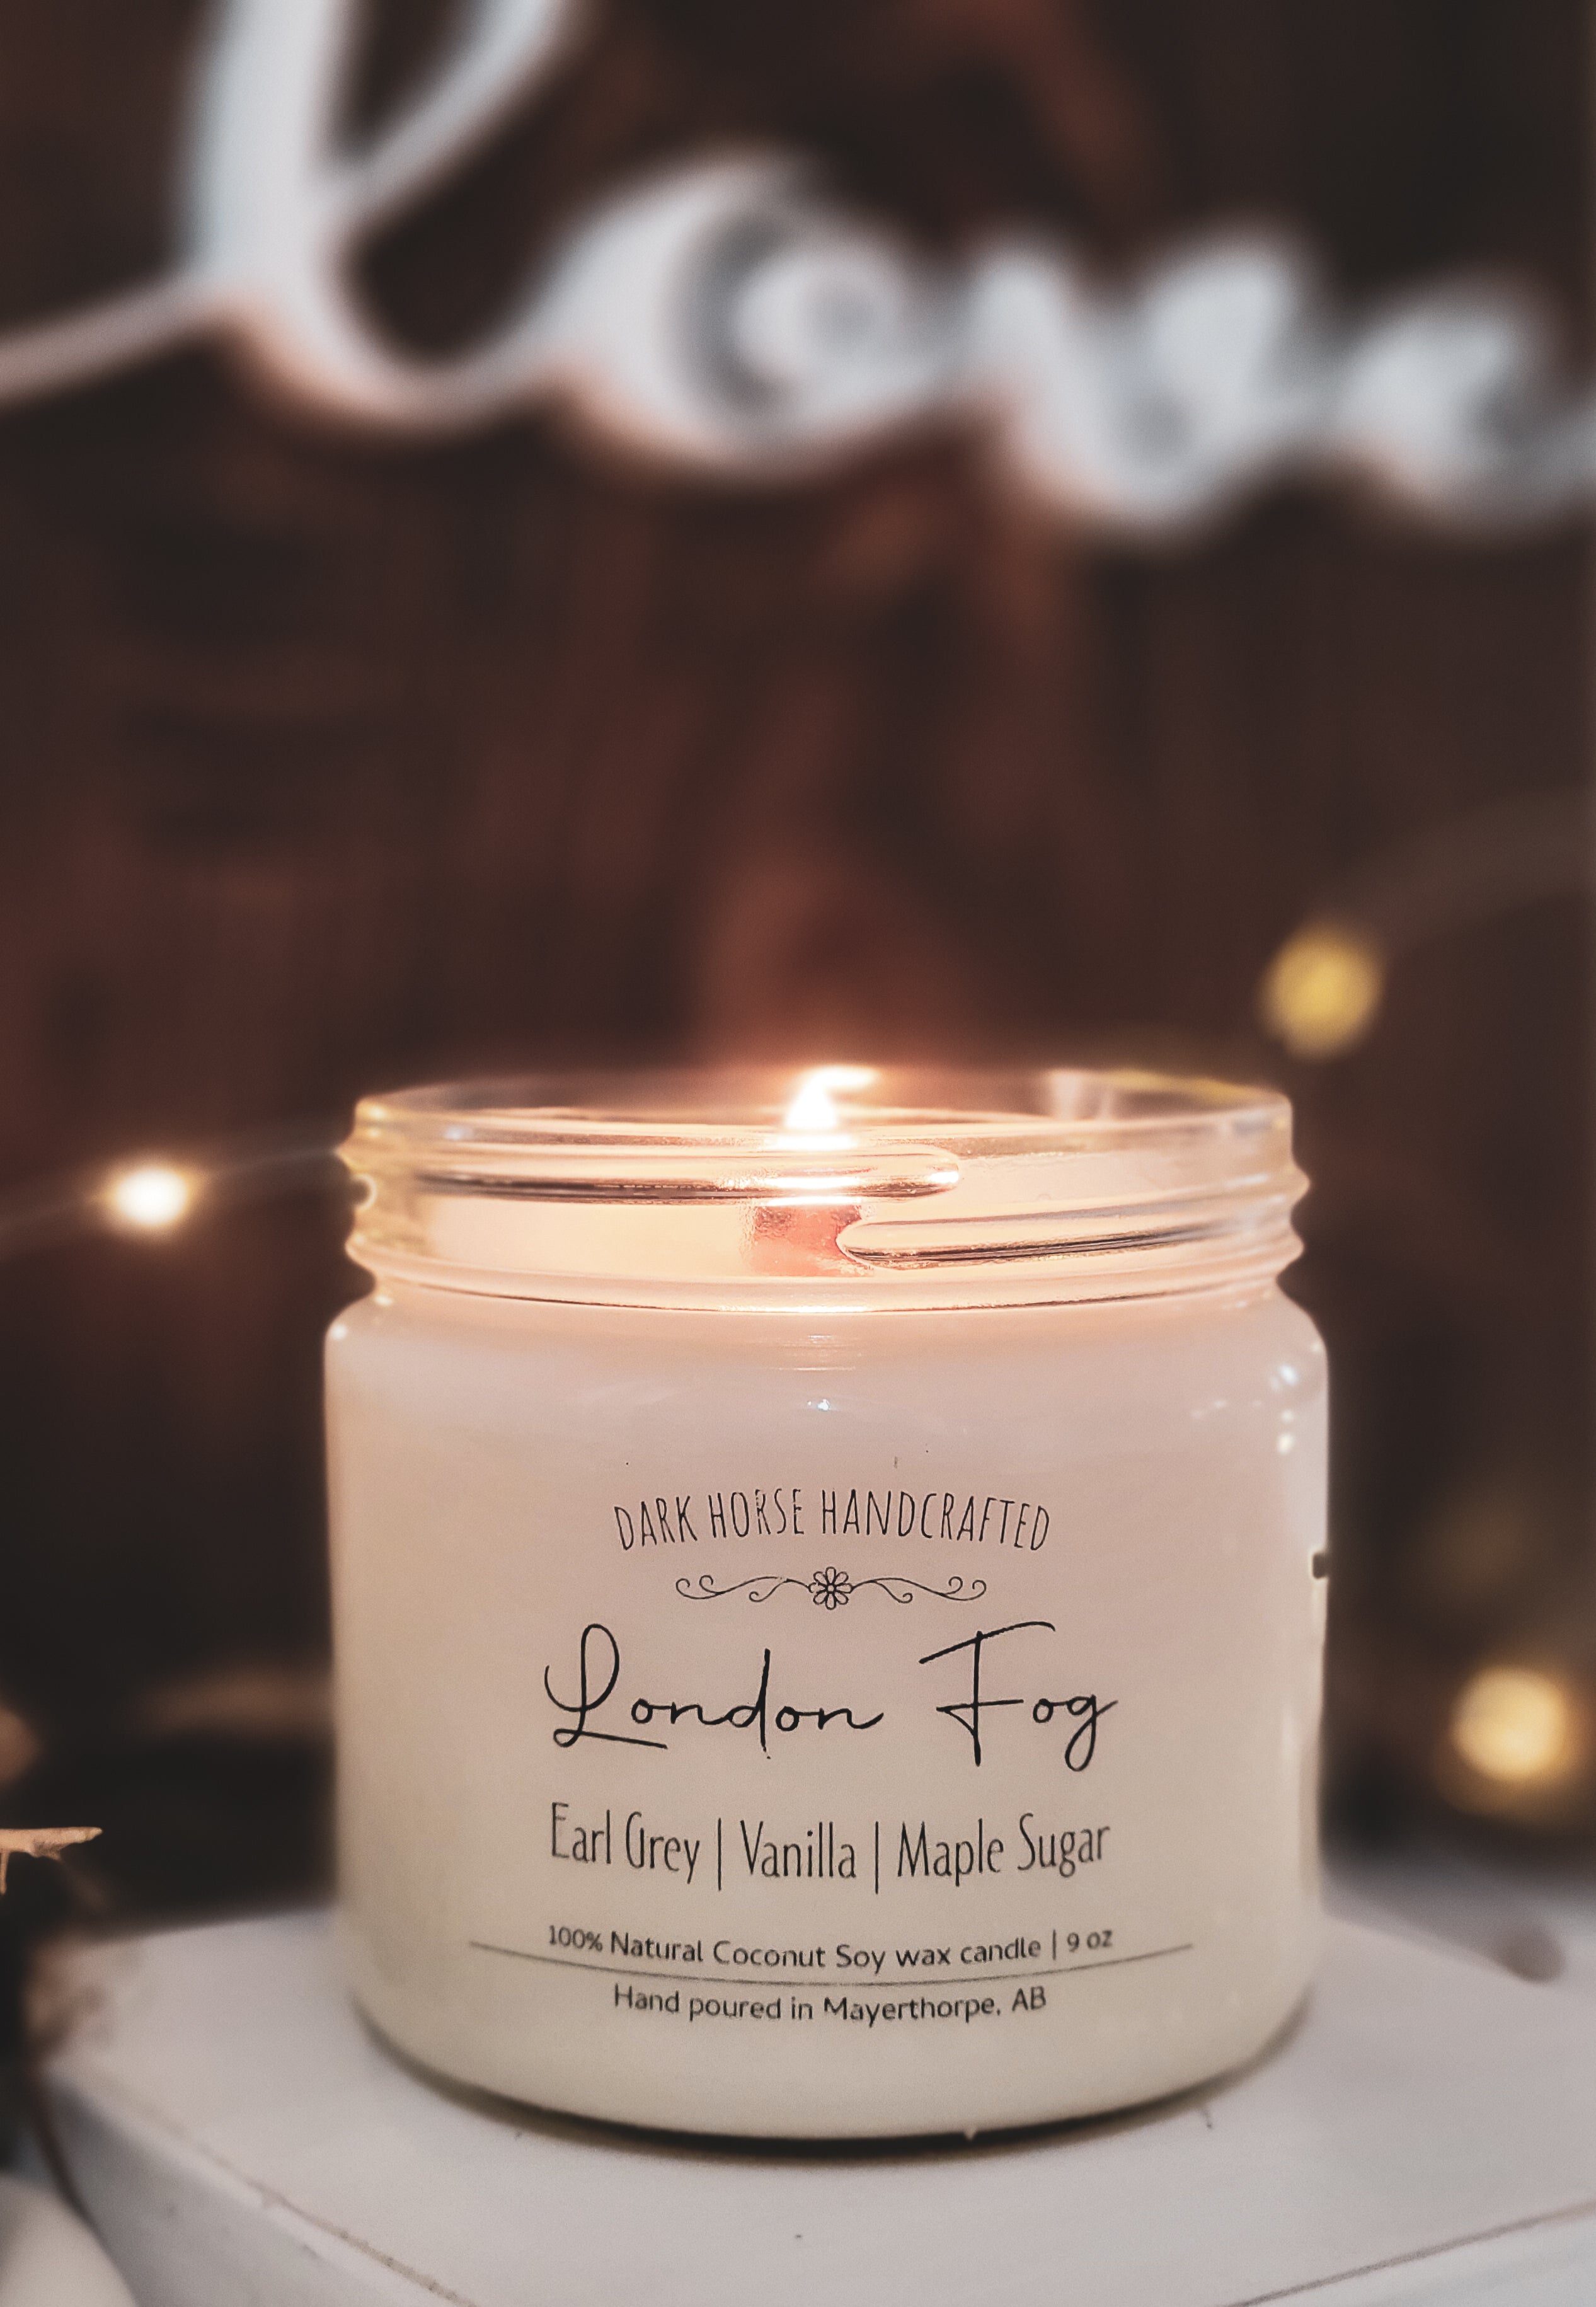 London Fog scented coconut soy candle with wood wick. Scent notes are Earl Grey, Vanilla & Maple Sugar